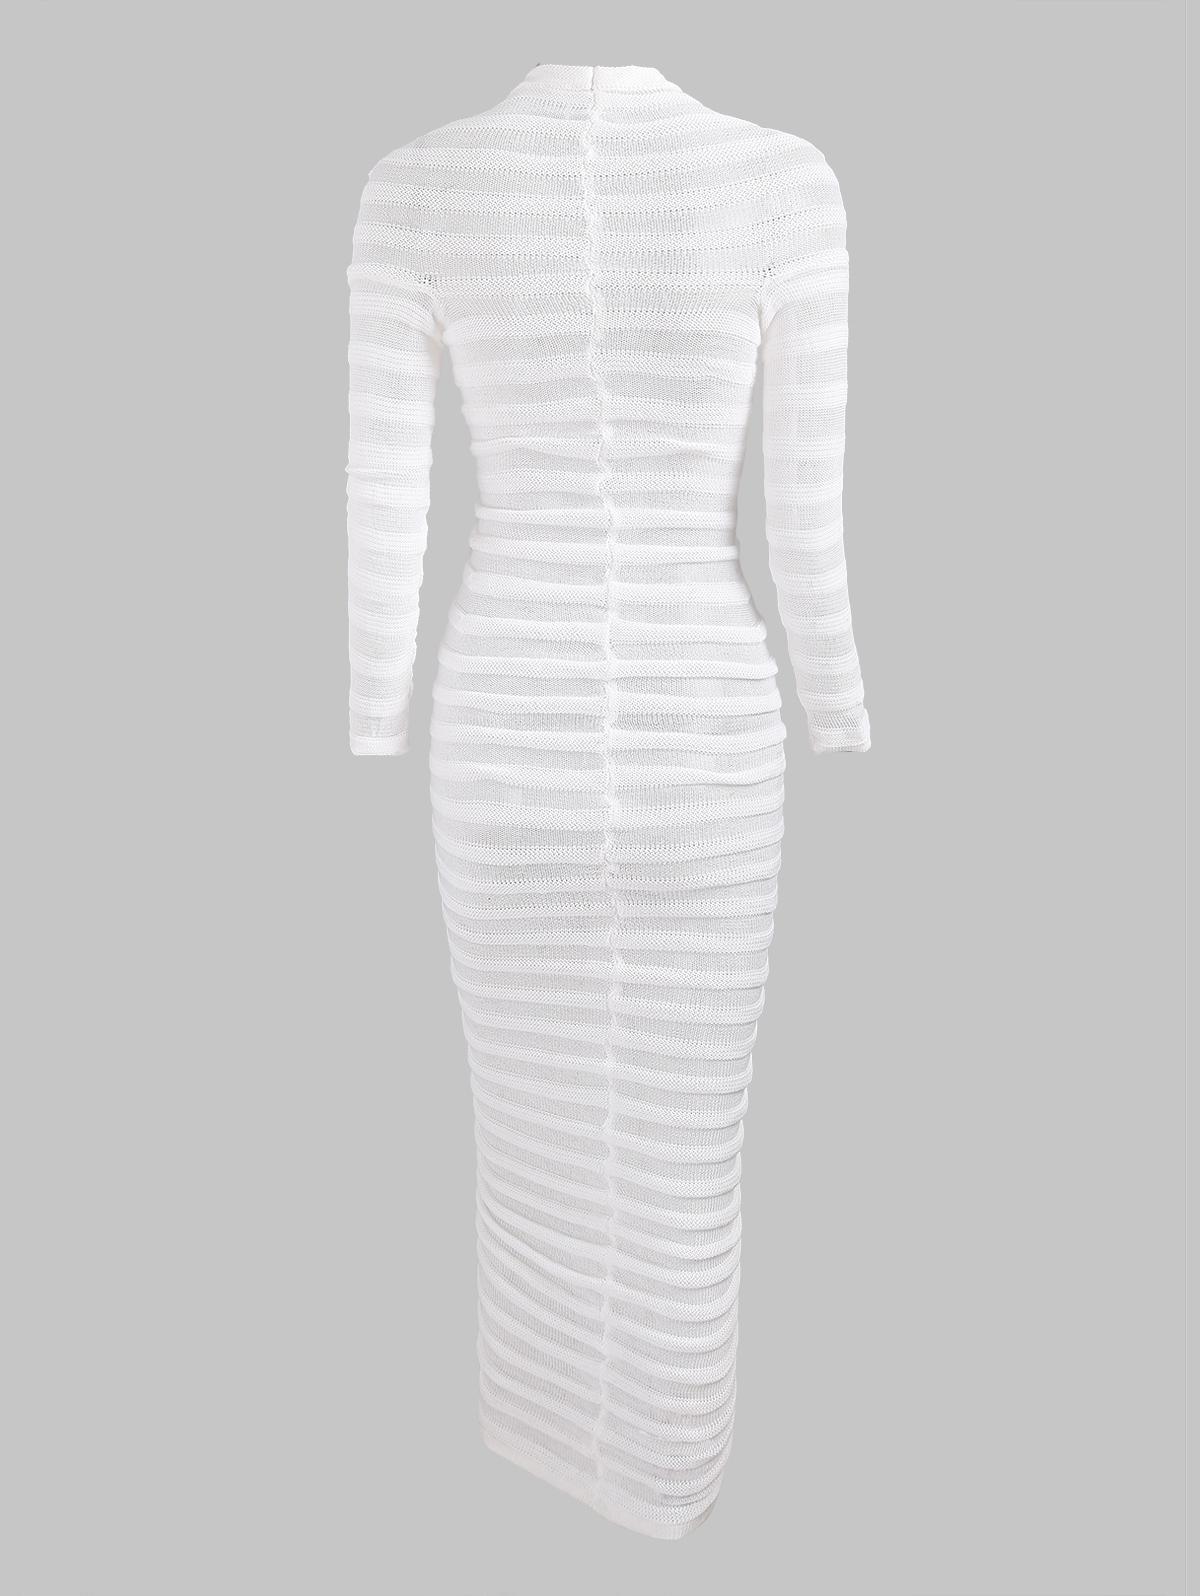 Zaful Sexy Party Club See Through Openwork Long Sleeves Round Neck Maxi  Slinky Sweater Dress in White | Lyst